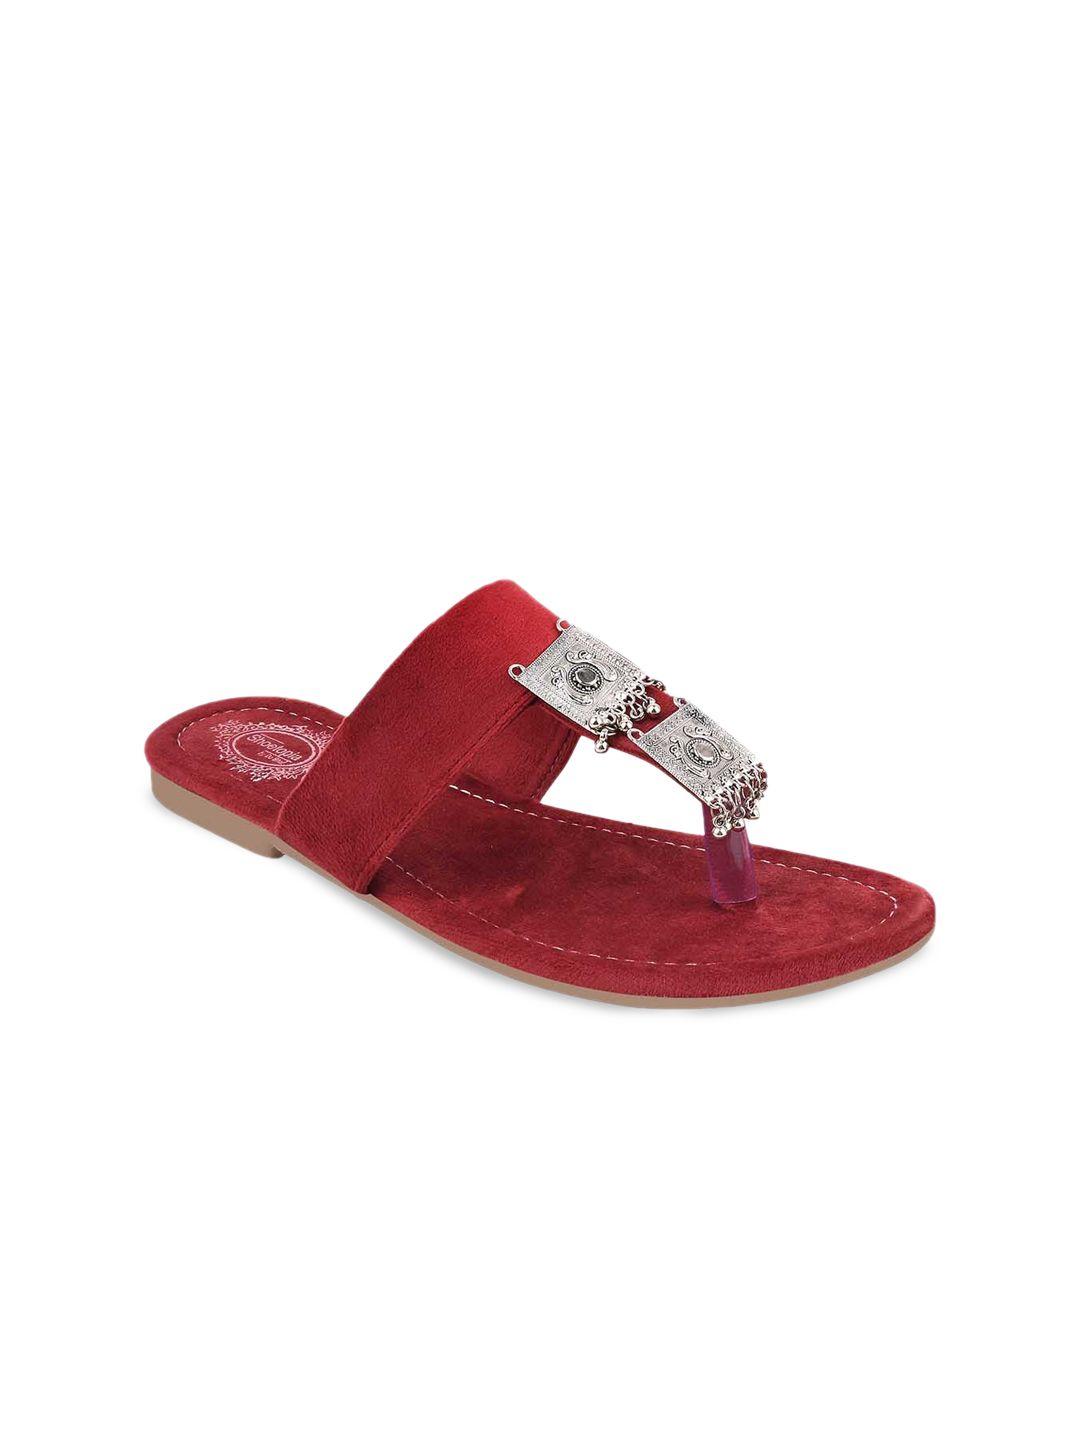 shoetopia embellished suede ethnic t-strap flats